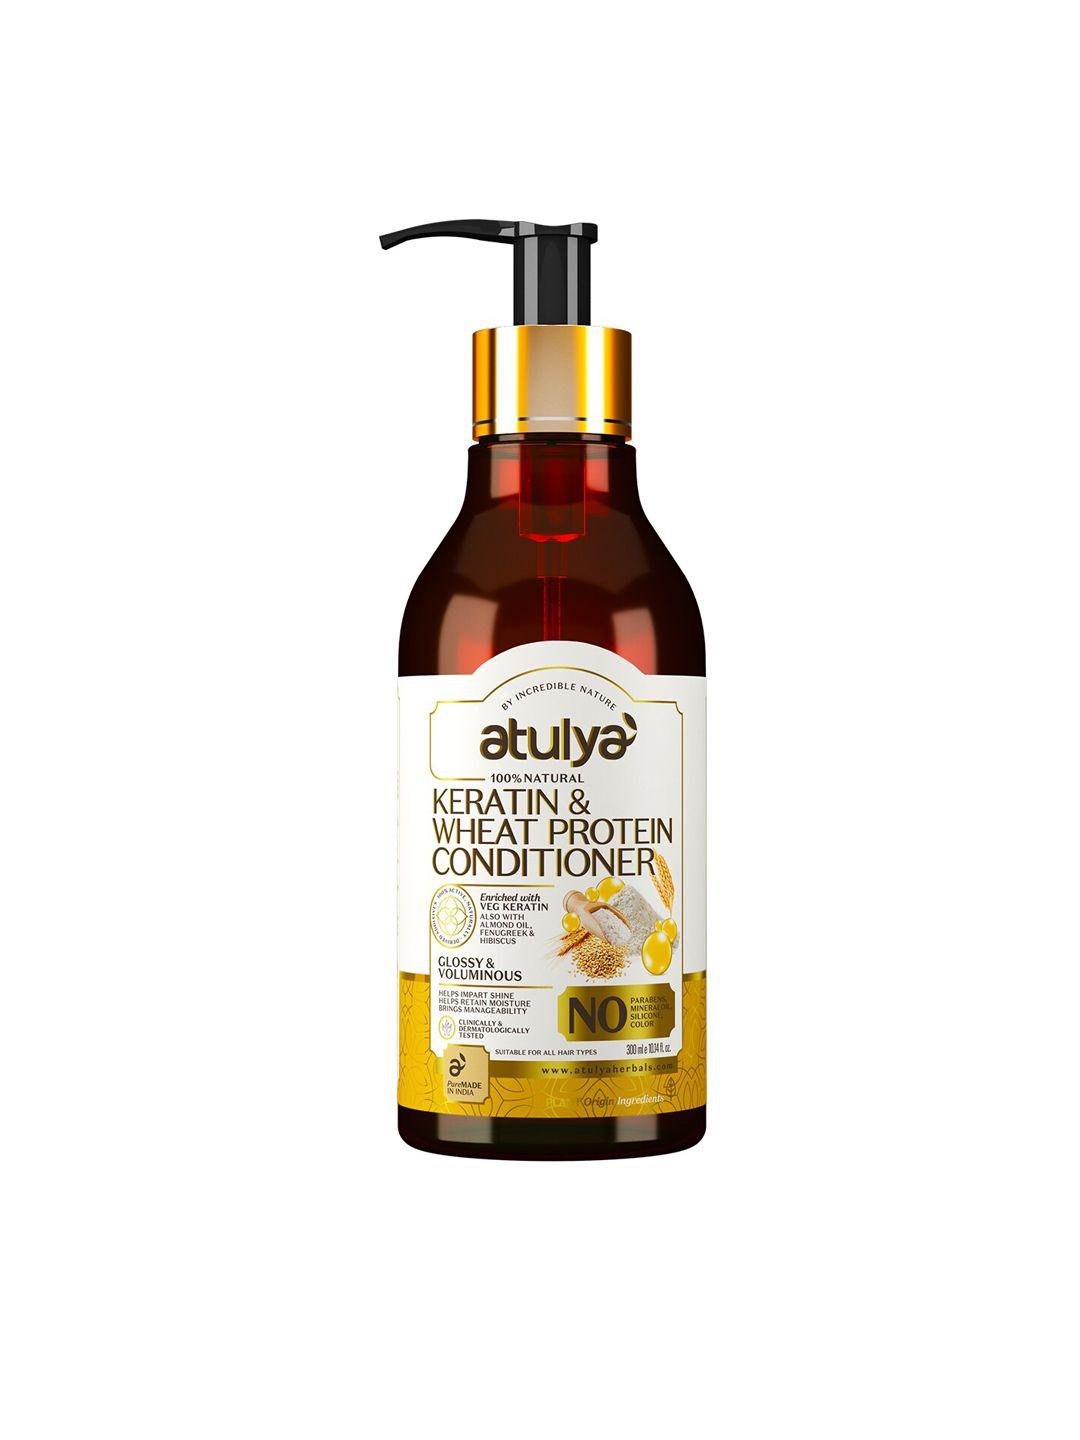 atulya keratin & wheat protein hair conditioner for glossy hair 300 ml